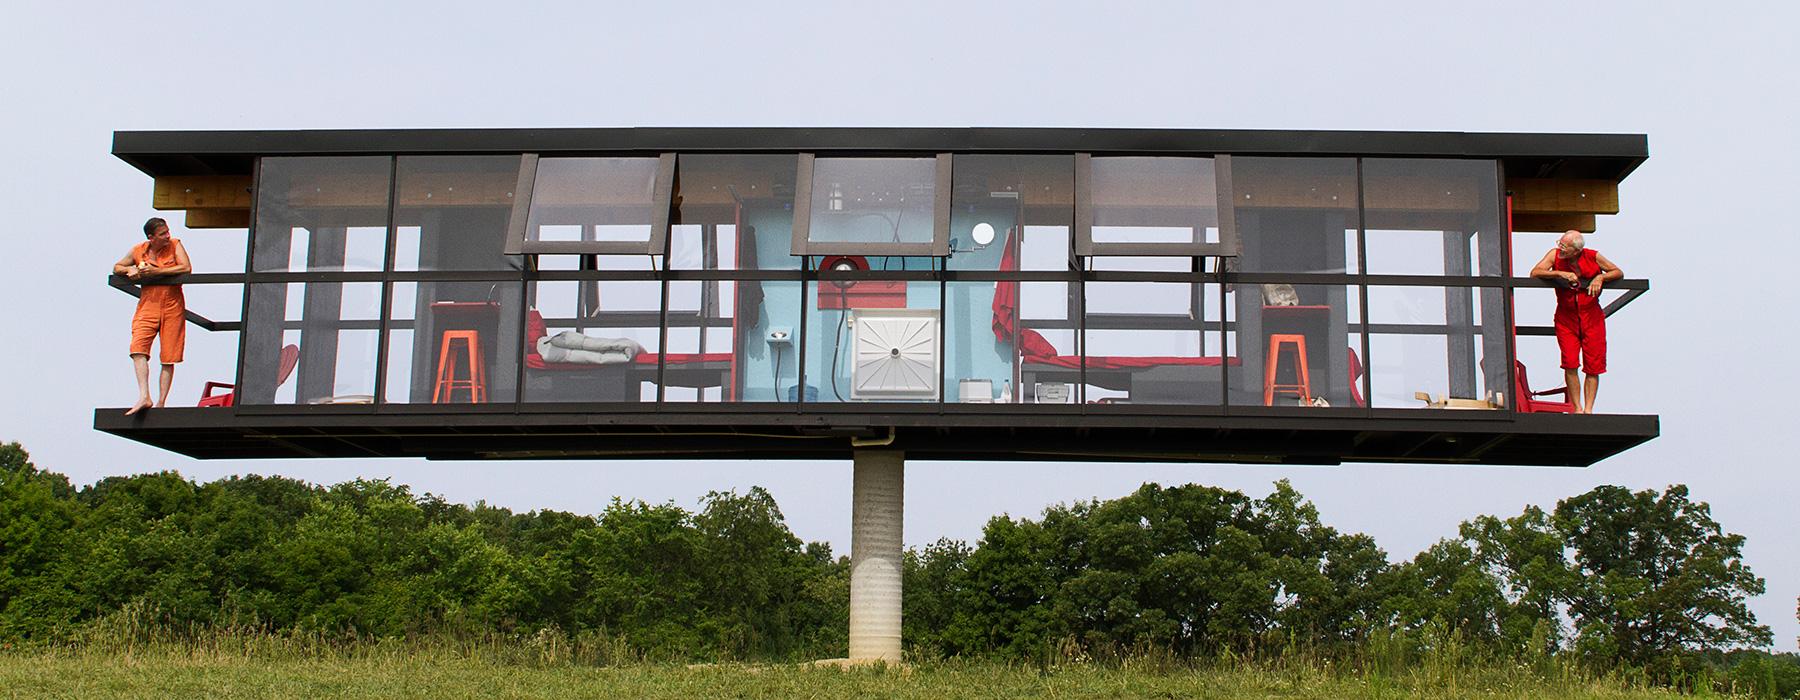 Rotating 'ReActor' house designed and built by PhD student Alex Schweder and artist Ward Shelley in upstate New York